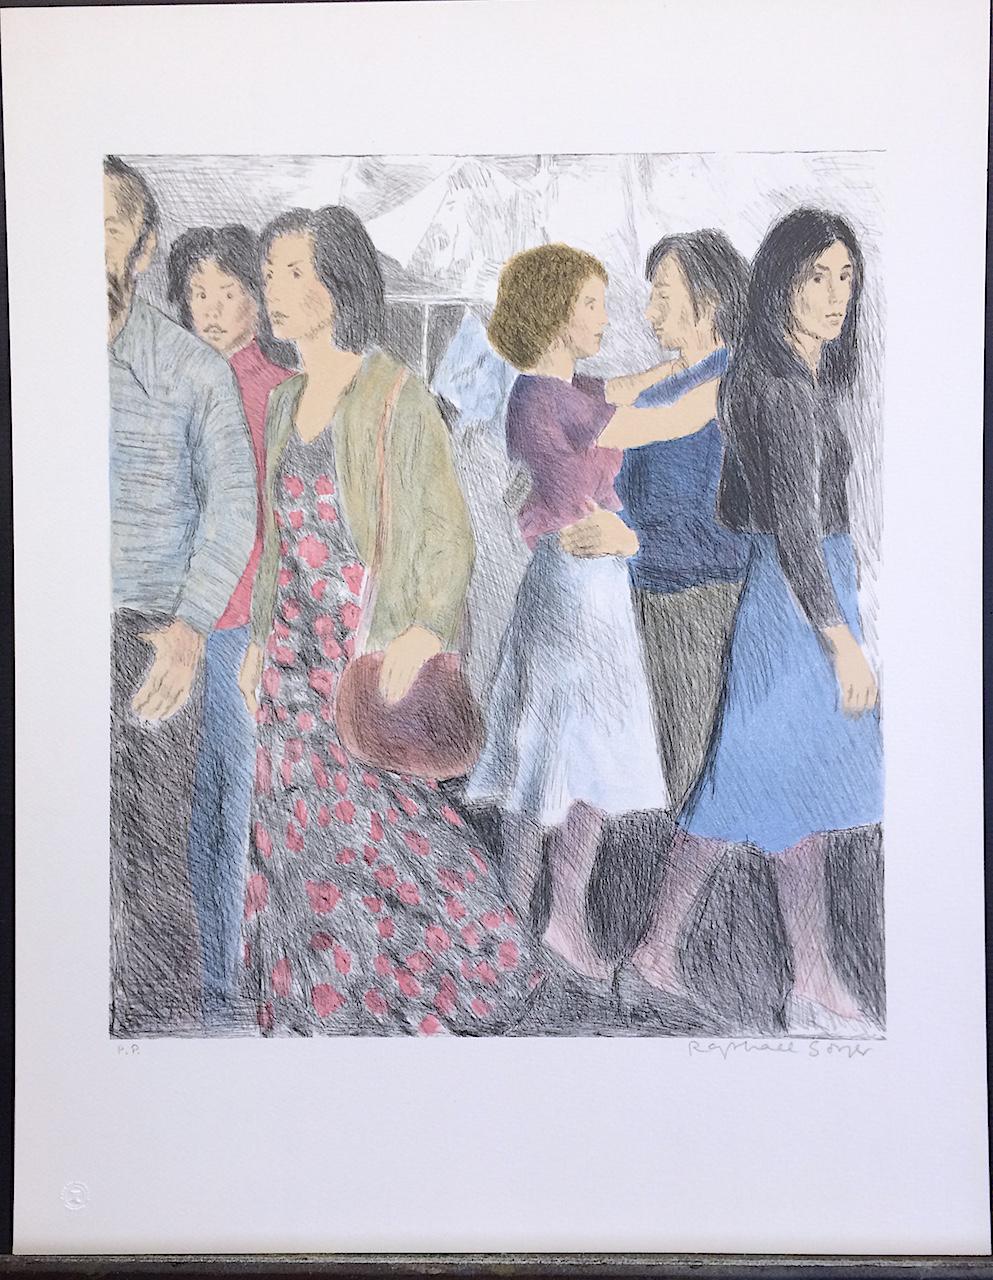 STREET SCENE Signed Lithograph, NYC Crowd Portrait Pencil Drawing, A-Line Skirts - Gray Figurative Print by Raphael Soyer